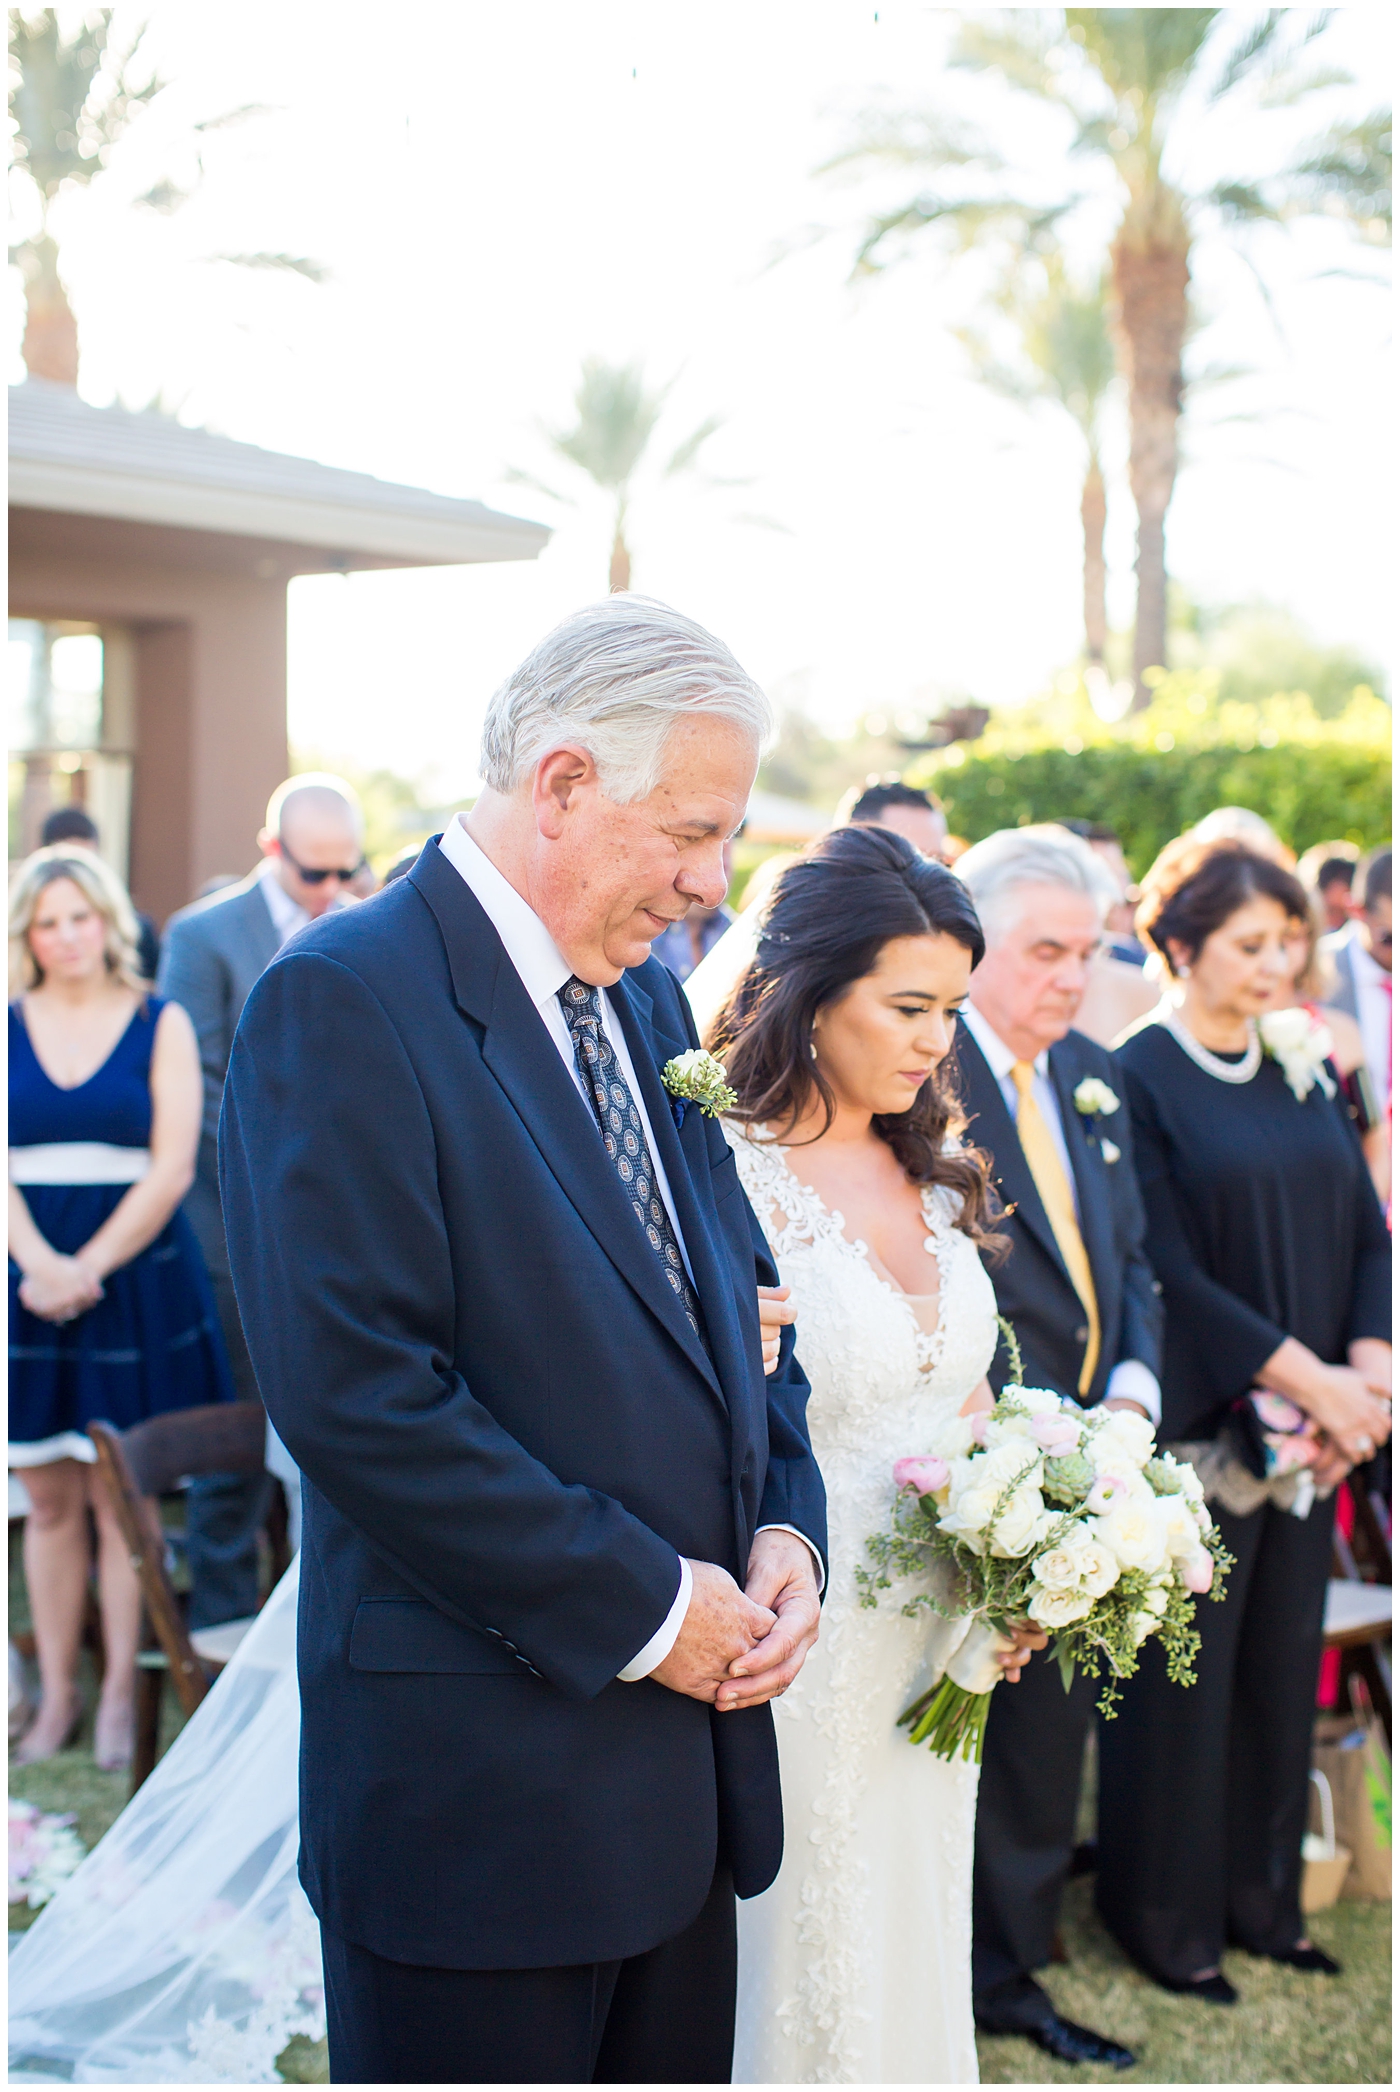 Gorgeous brunette bride in Justina Alexander wedding dress coming down the aisle at ceremony with her dad